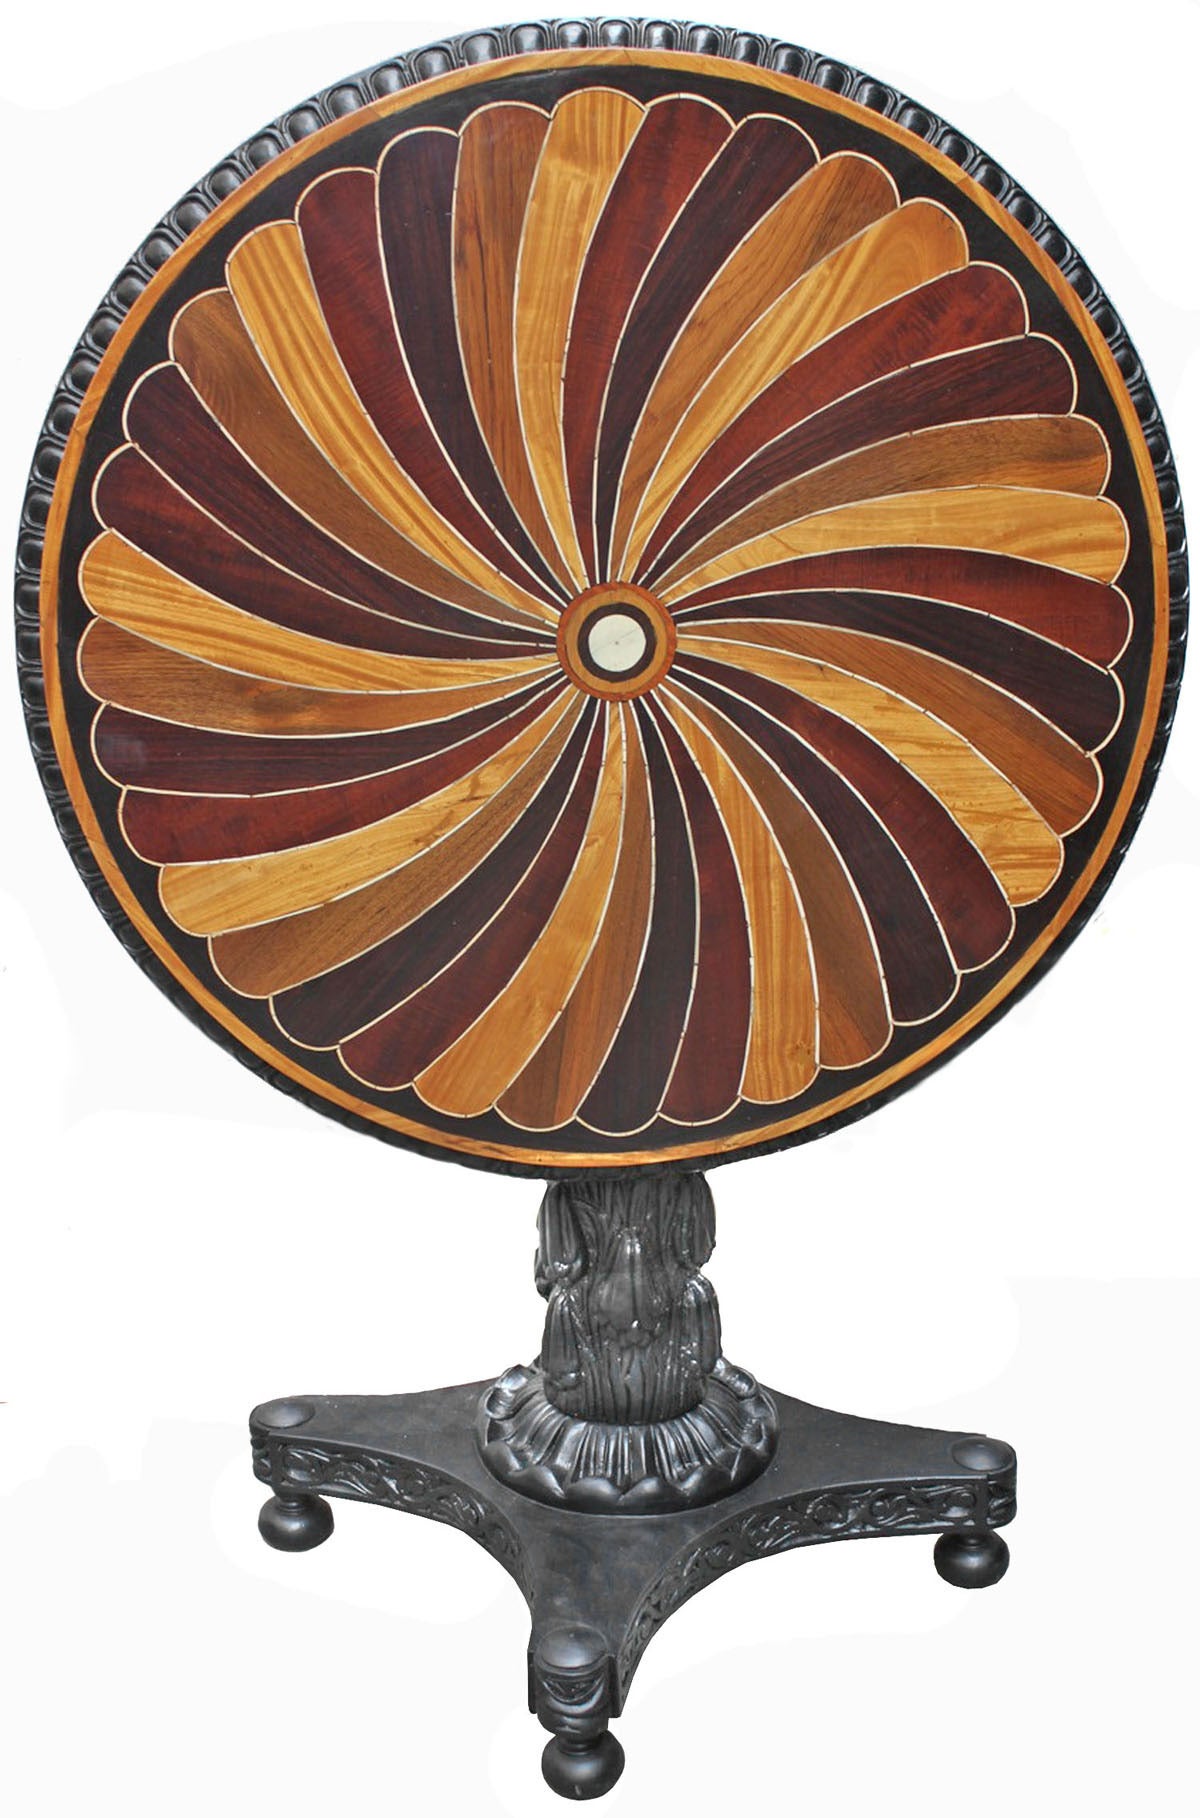 Anglo Indian Ceylonese Specimen Top Table, Circa 1860; circular tilt-top inlaid with a whorl of specimen veneers including Ivory and Ebony. This style was a specialty of the Galle District of Ceylon which was famous for it's specimen-wood furniture.